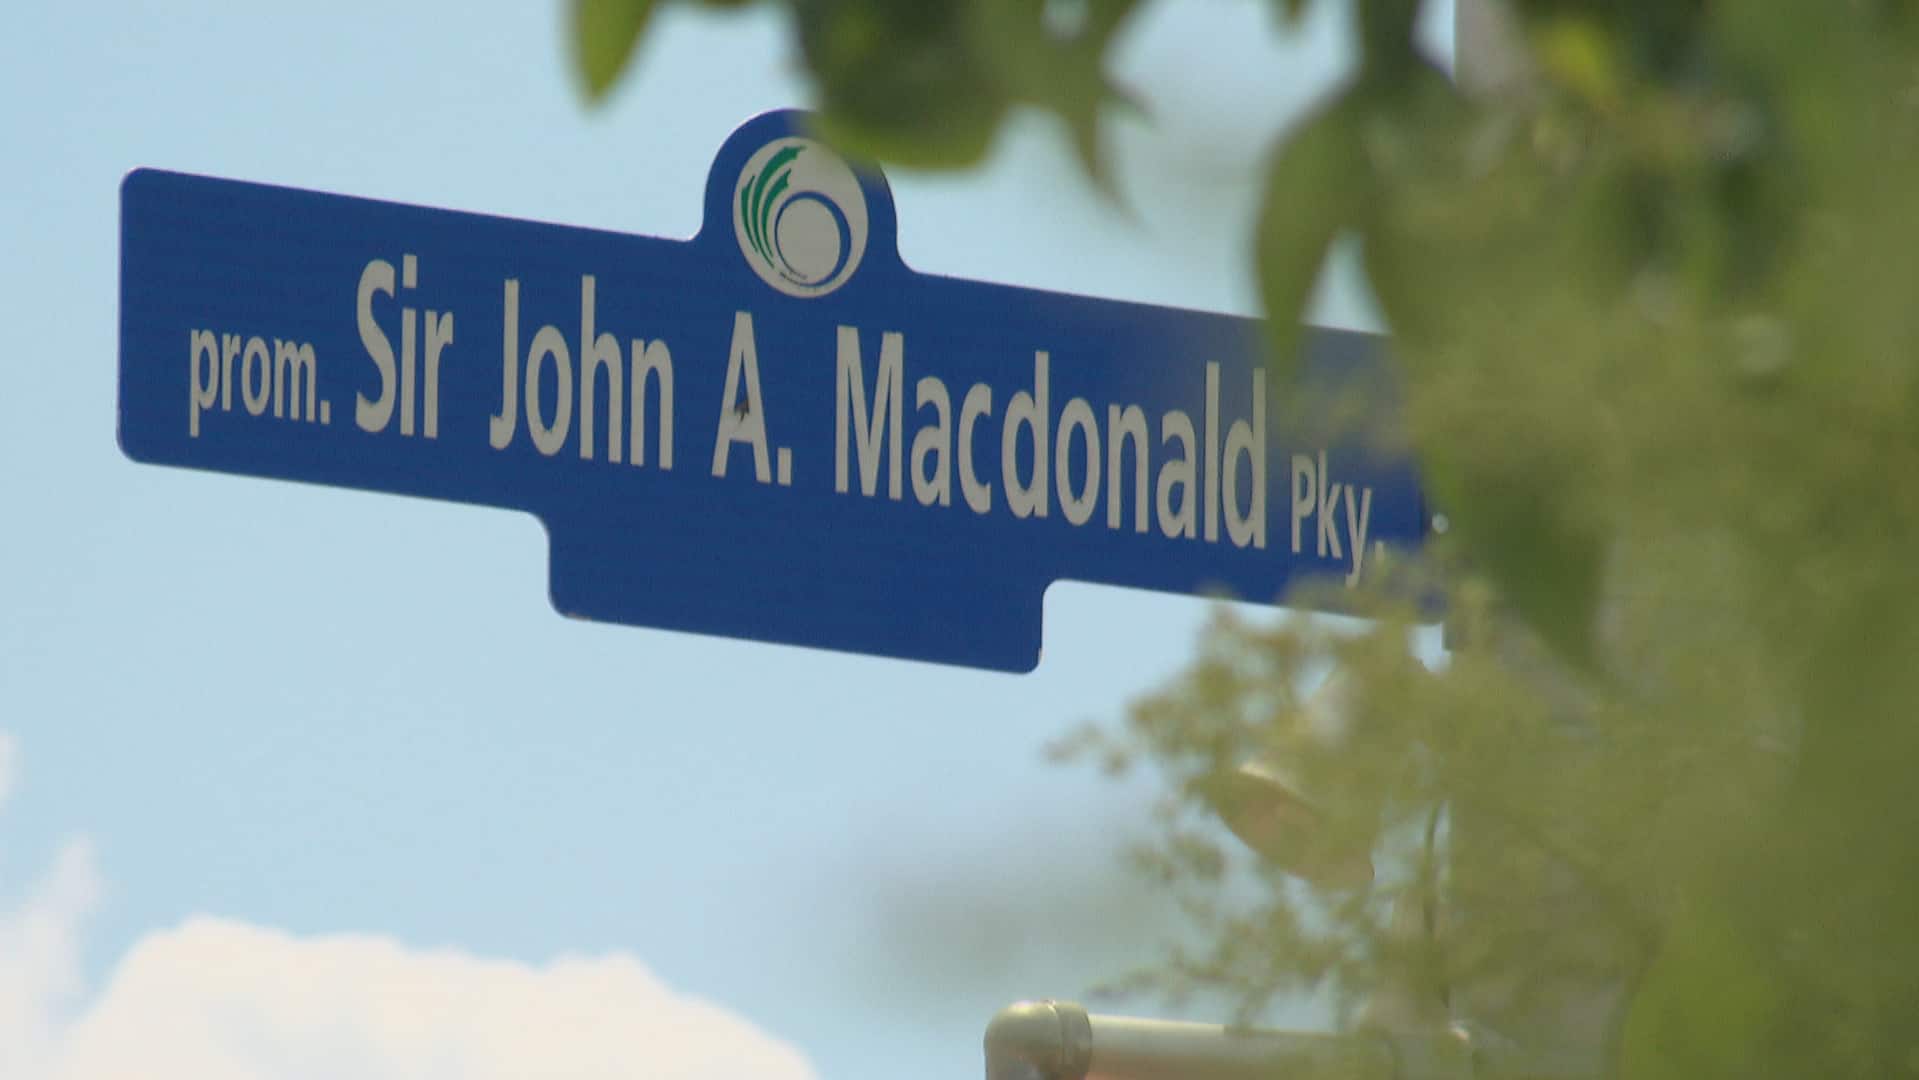 more than a year later sir john a macdonald parkways name remains unchanged 2